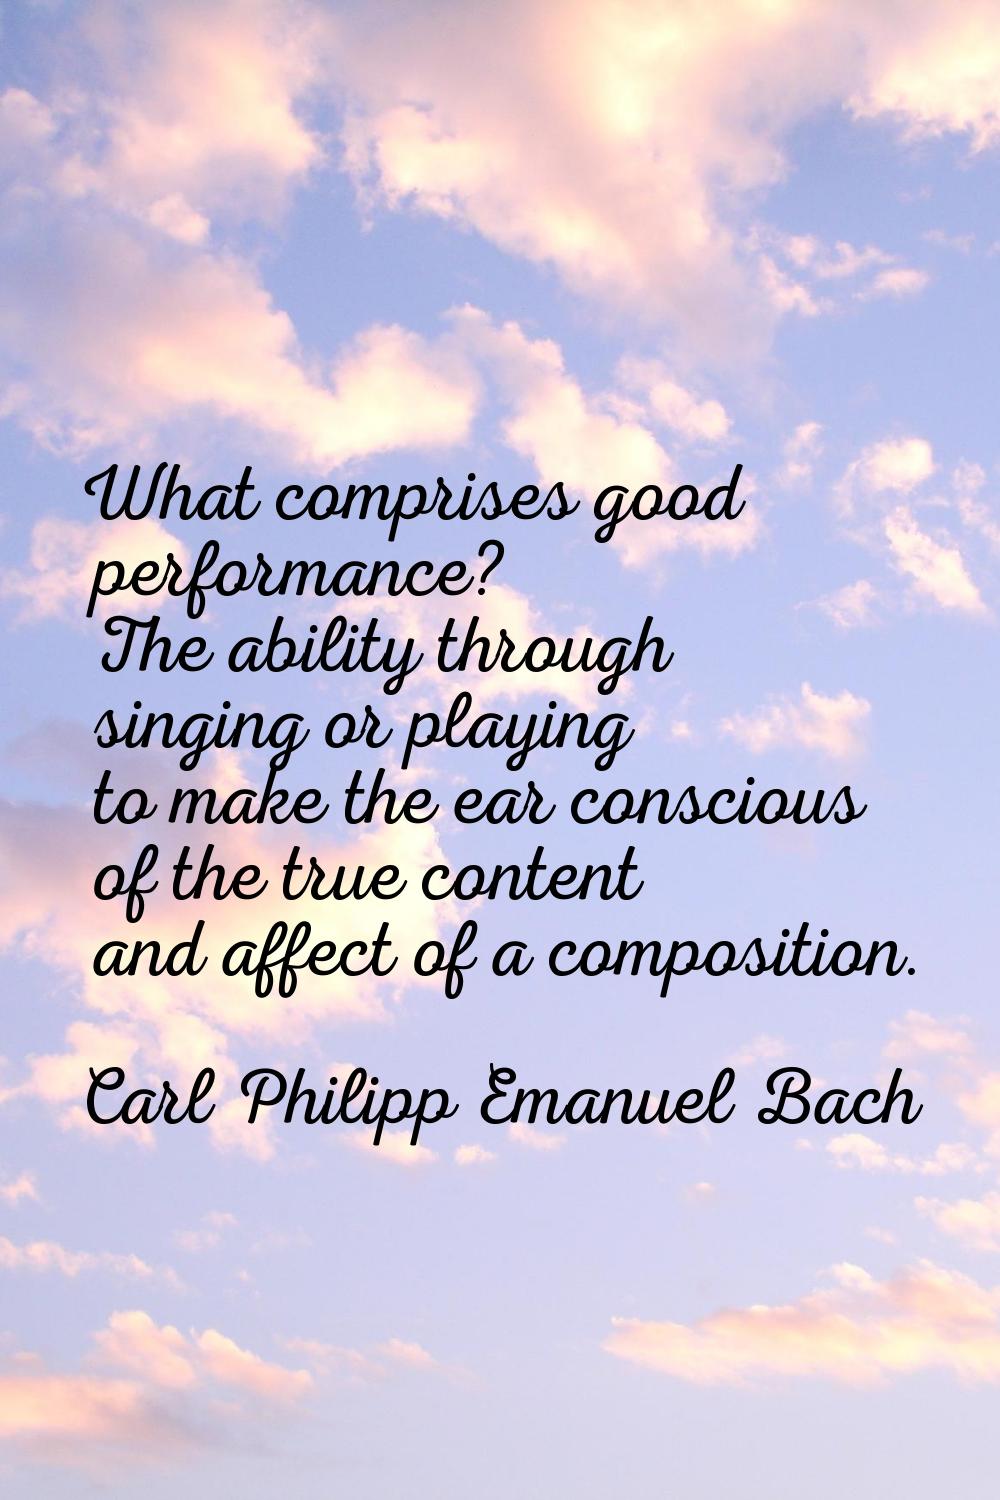 What comprises good performance? The ability through singing or playing to make the ear conscious o